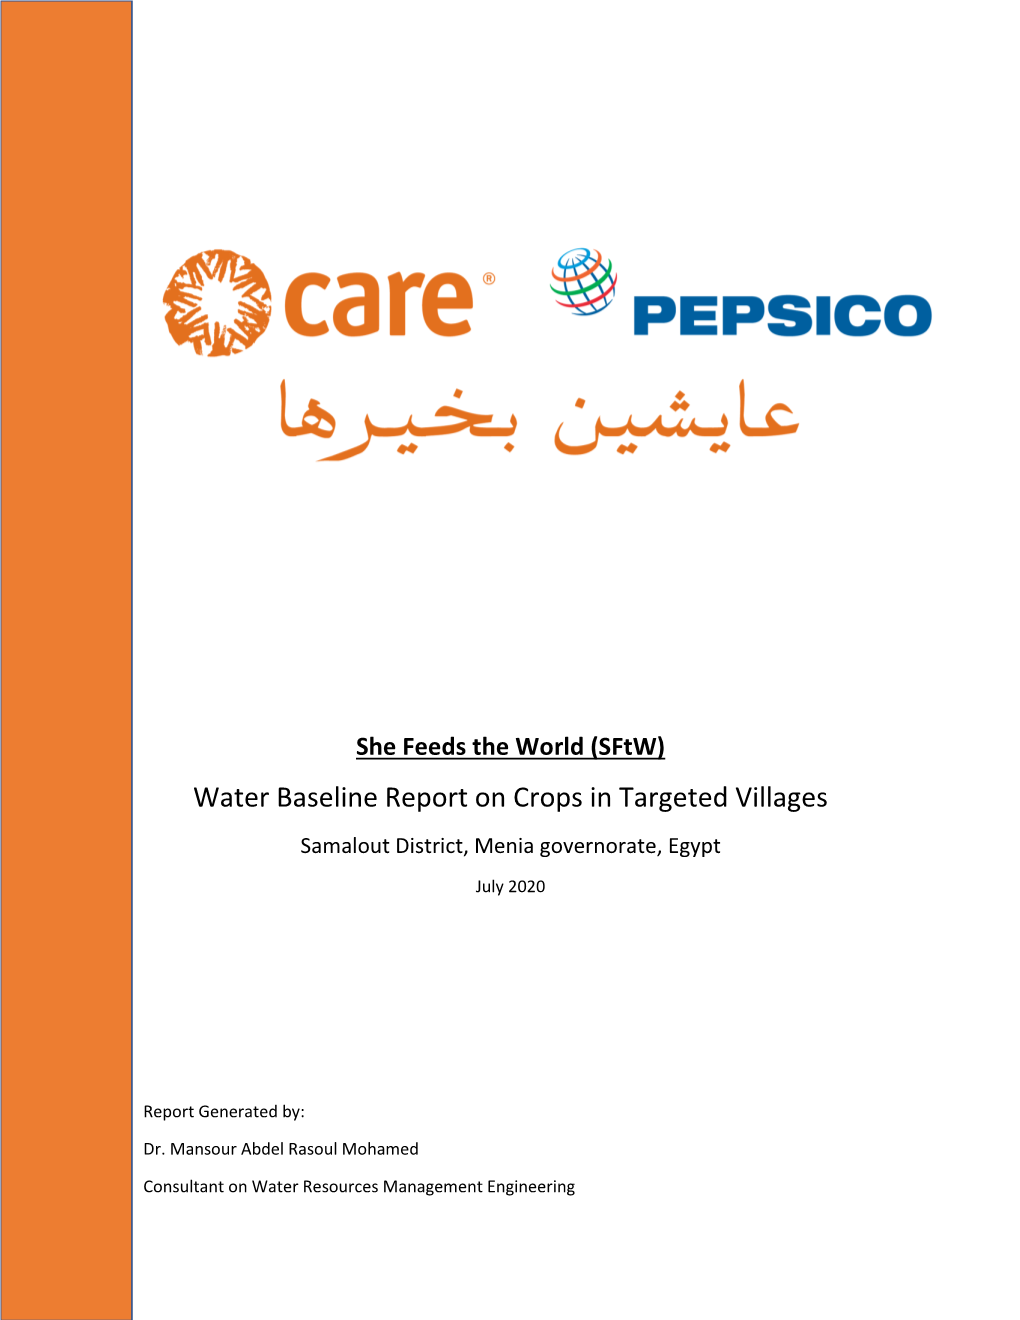 Water Baseline Report on Crops in Targeted Villages Samalout District, Menia Governorate, Egypt